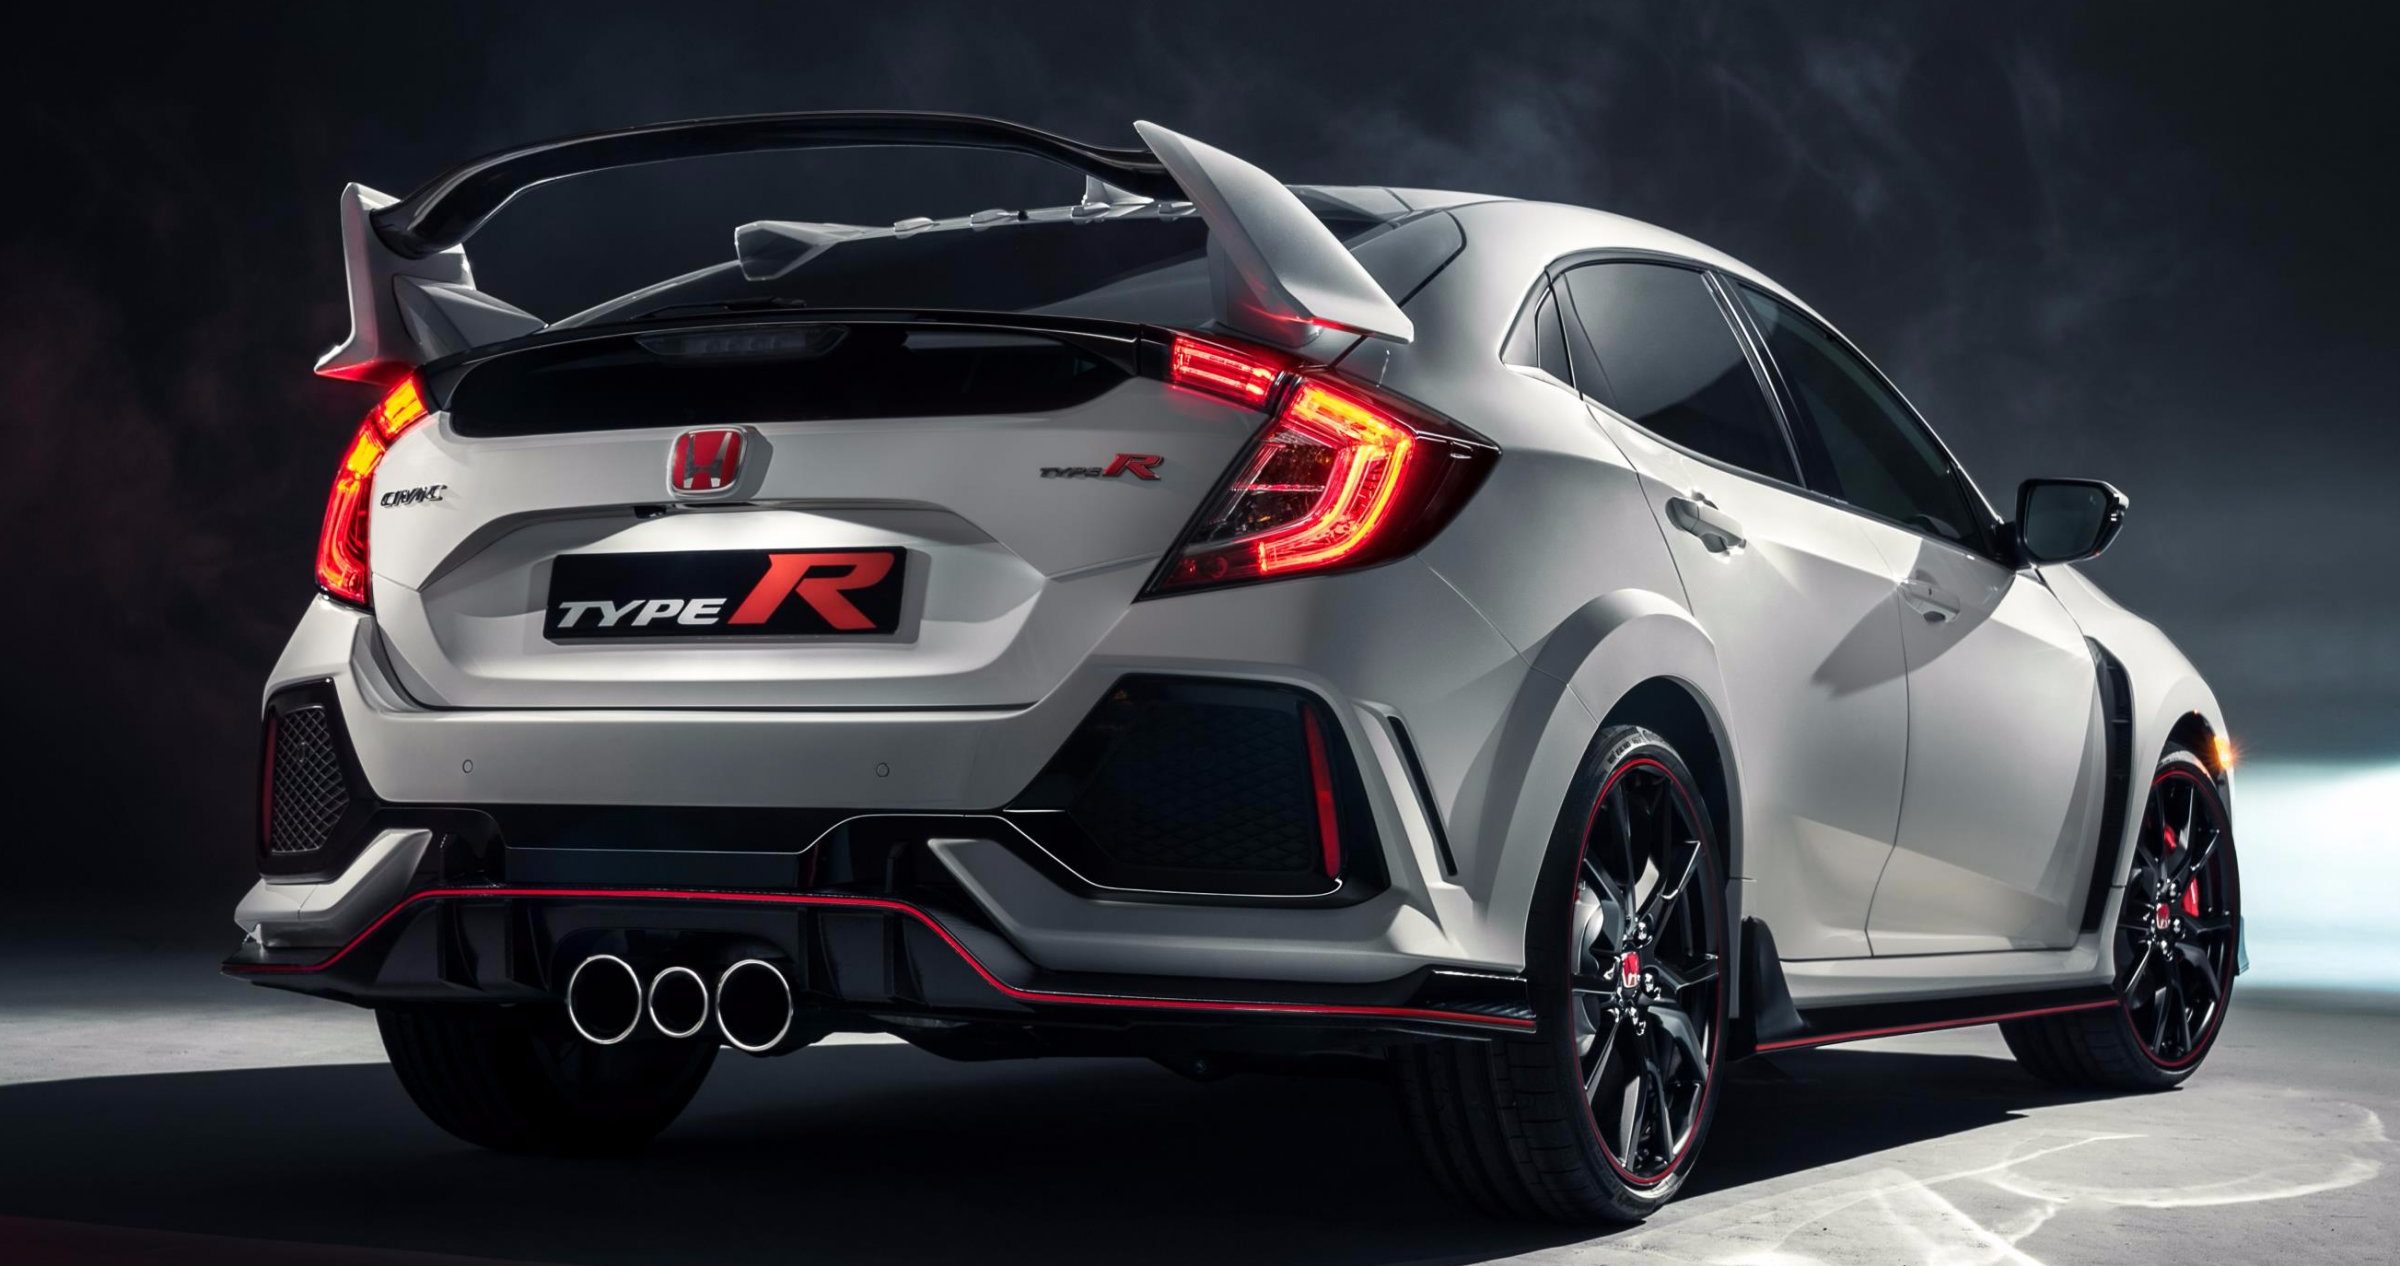 Is the Civic Type R The Best Driver Car For Under $50k